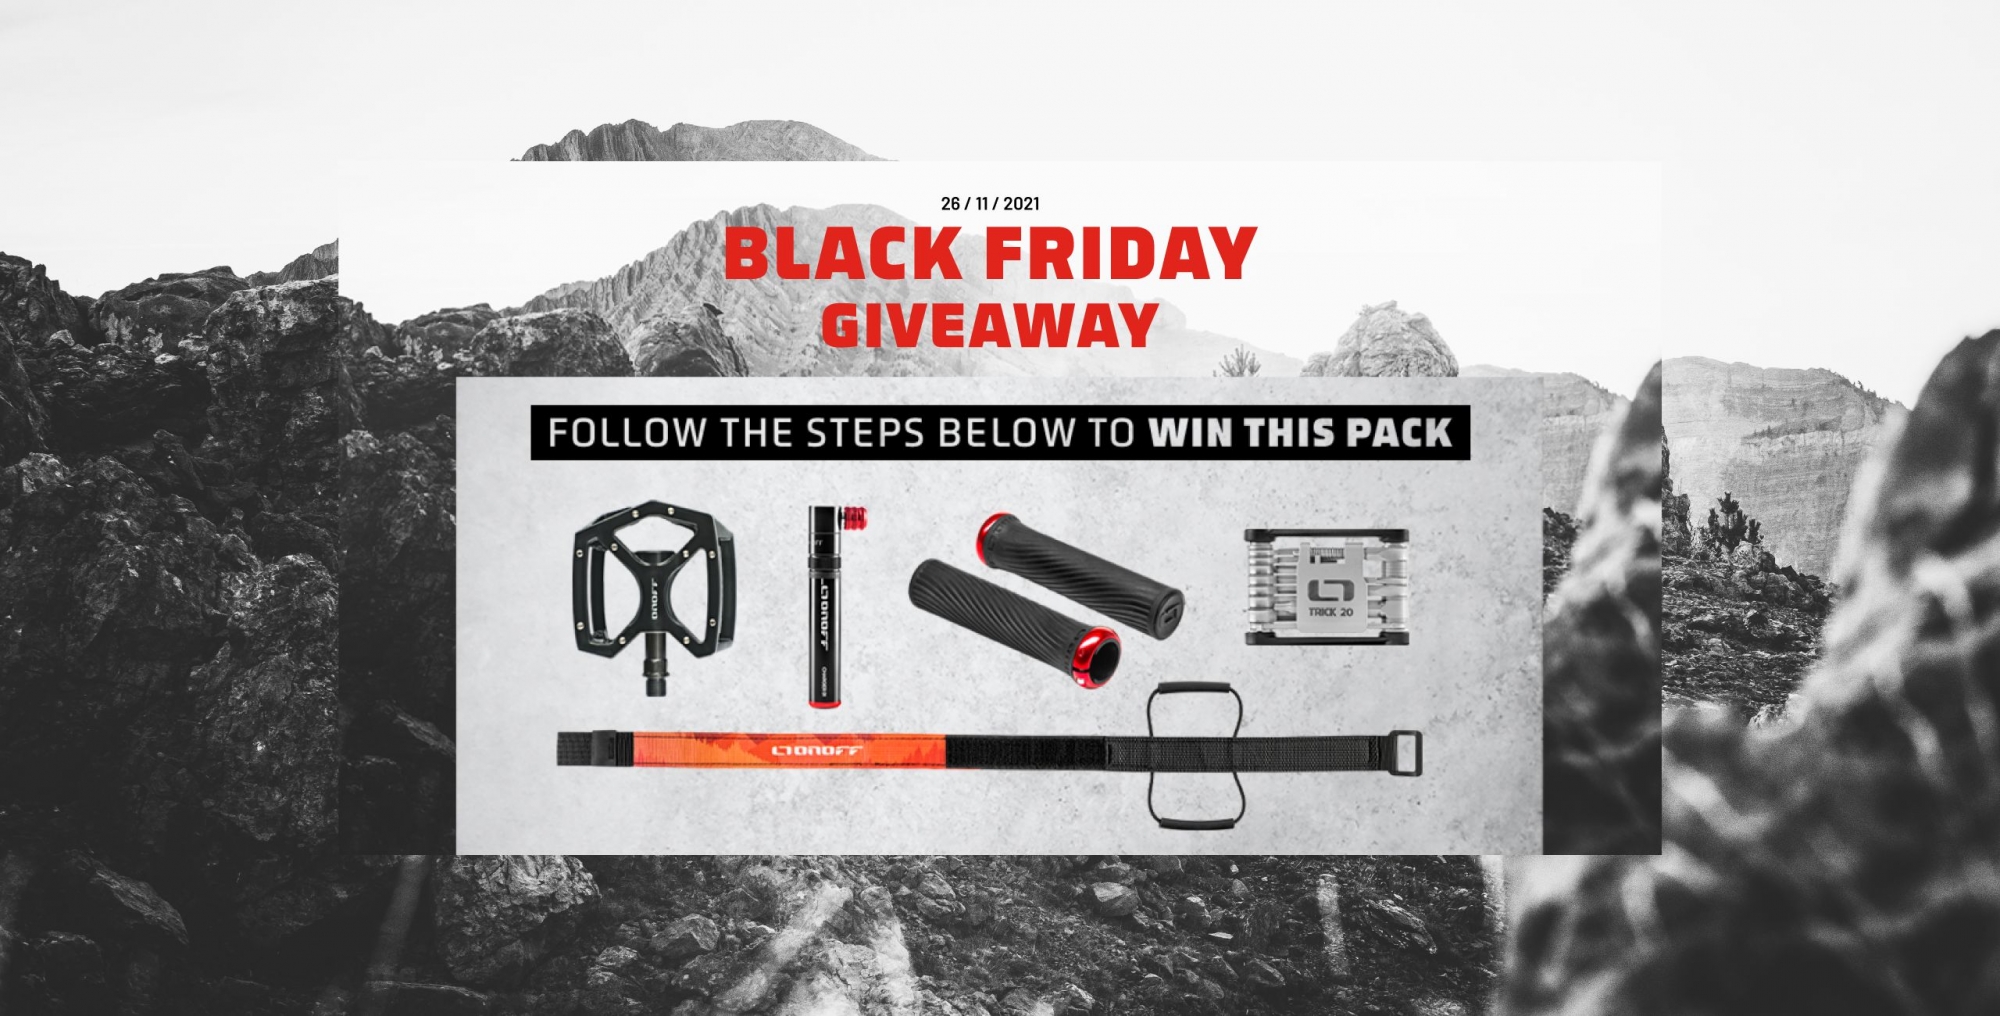 ONOFF is pleased to present a FREE GIVEAWAY in celebration of Black Friday!!